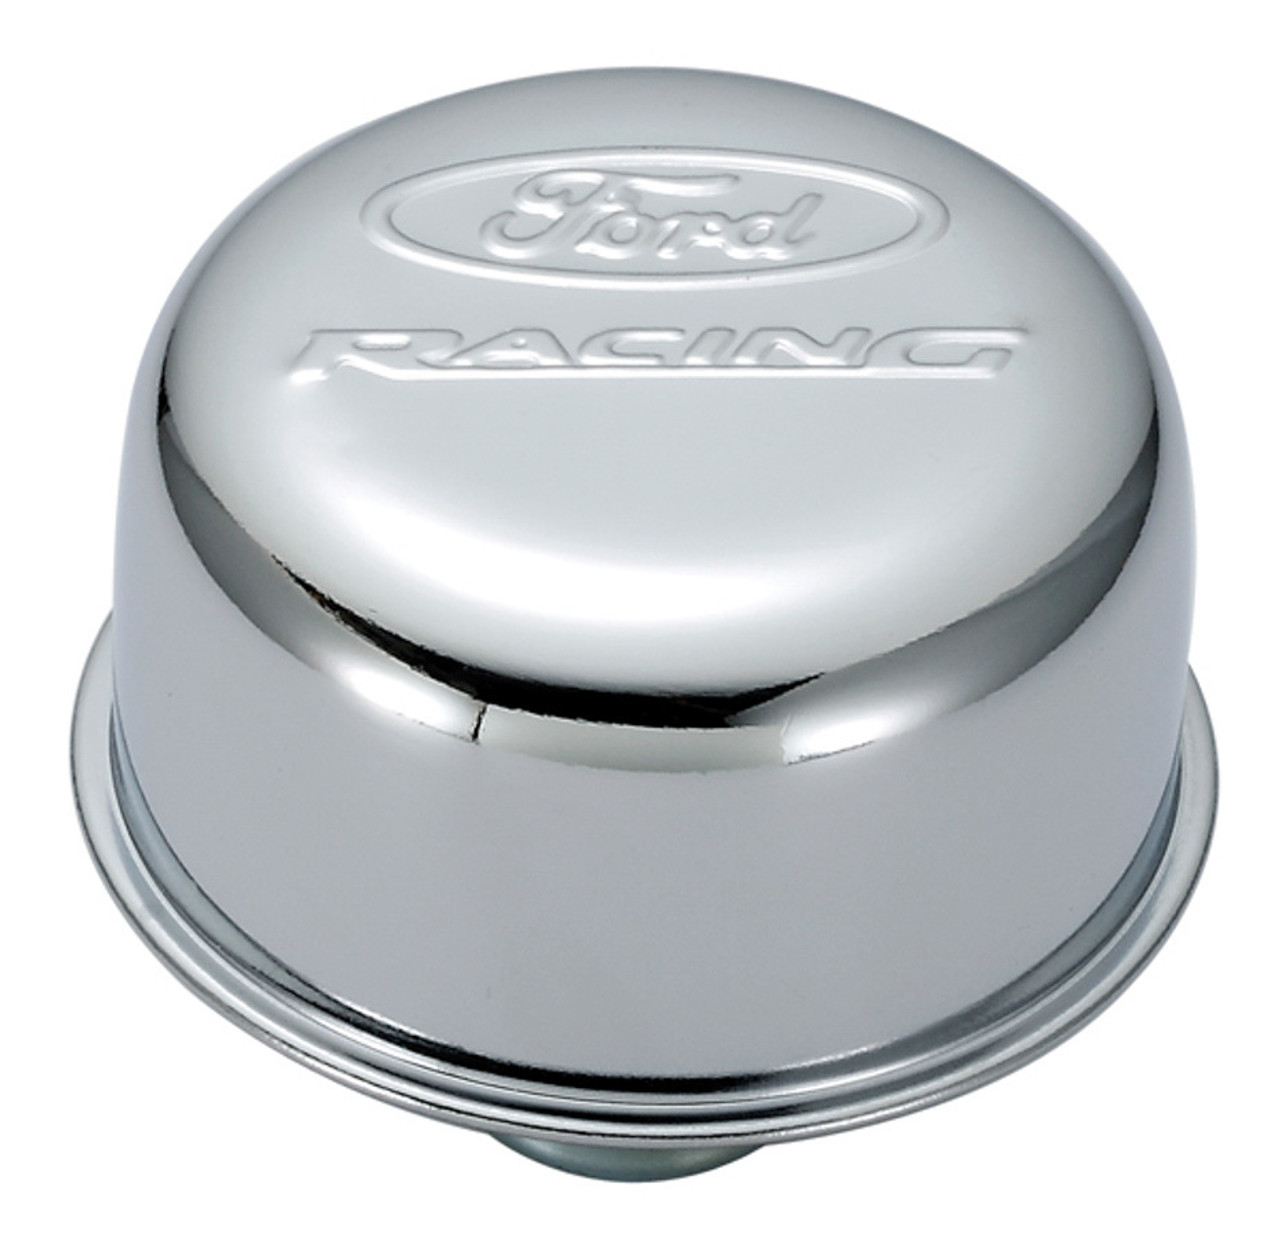 Ford Racing Air Breather Cap Chrome Push-In